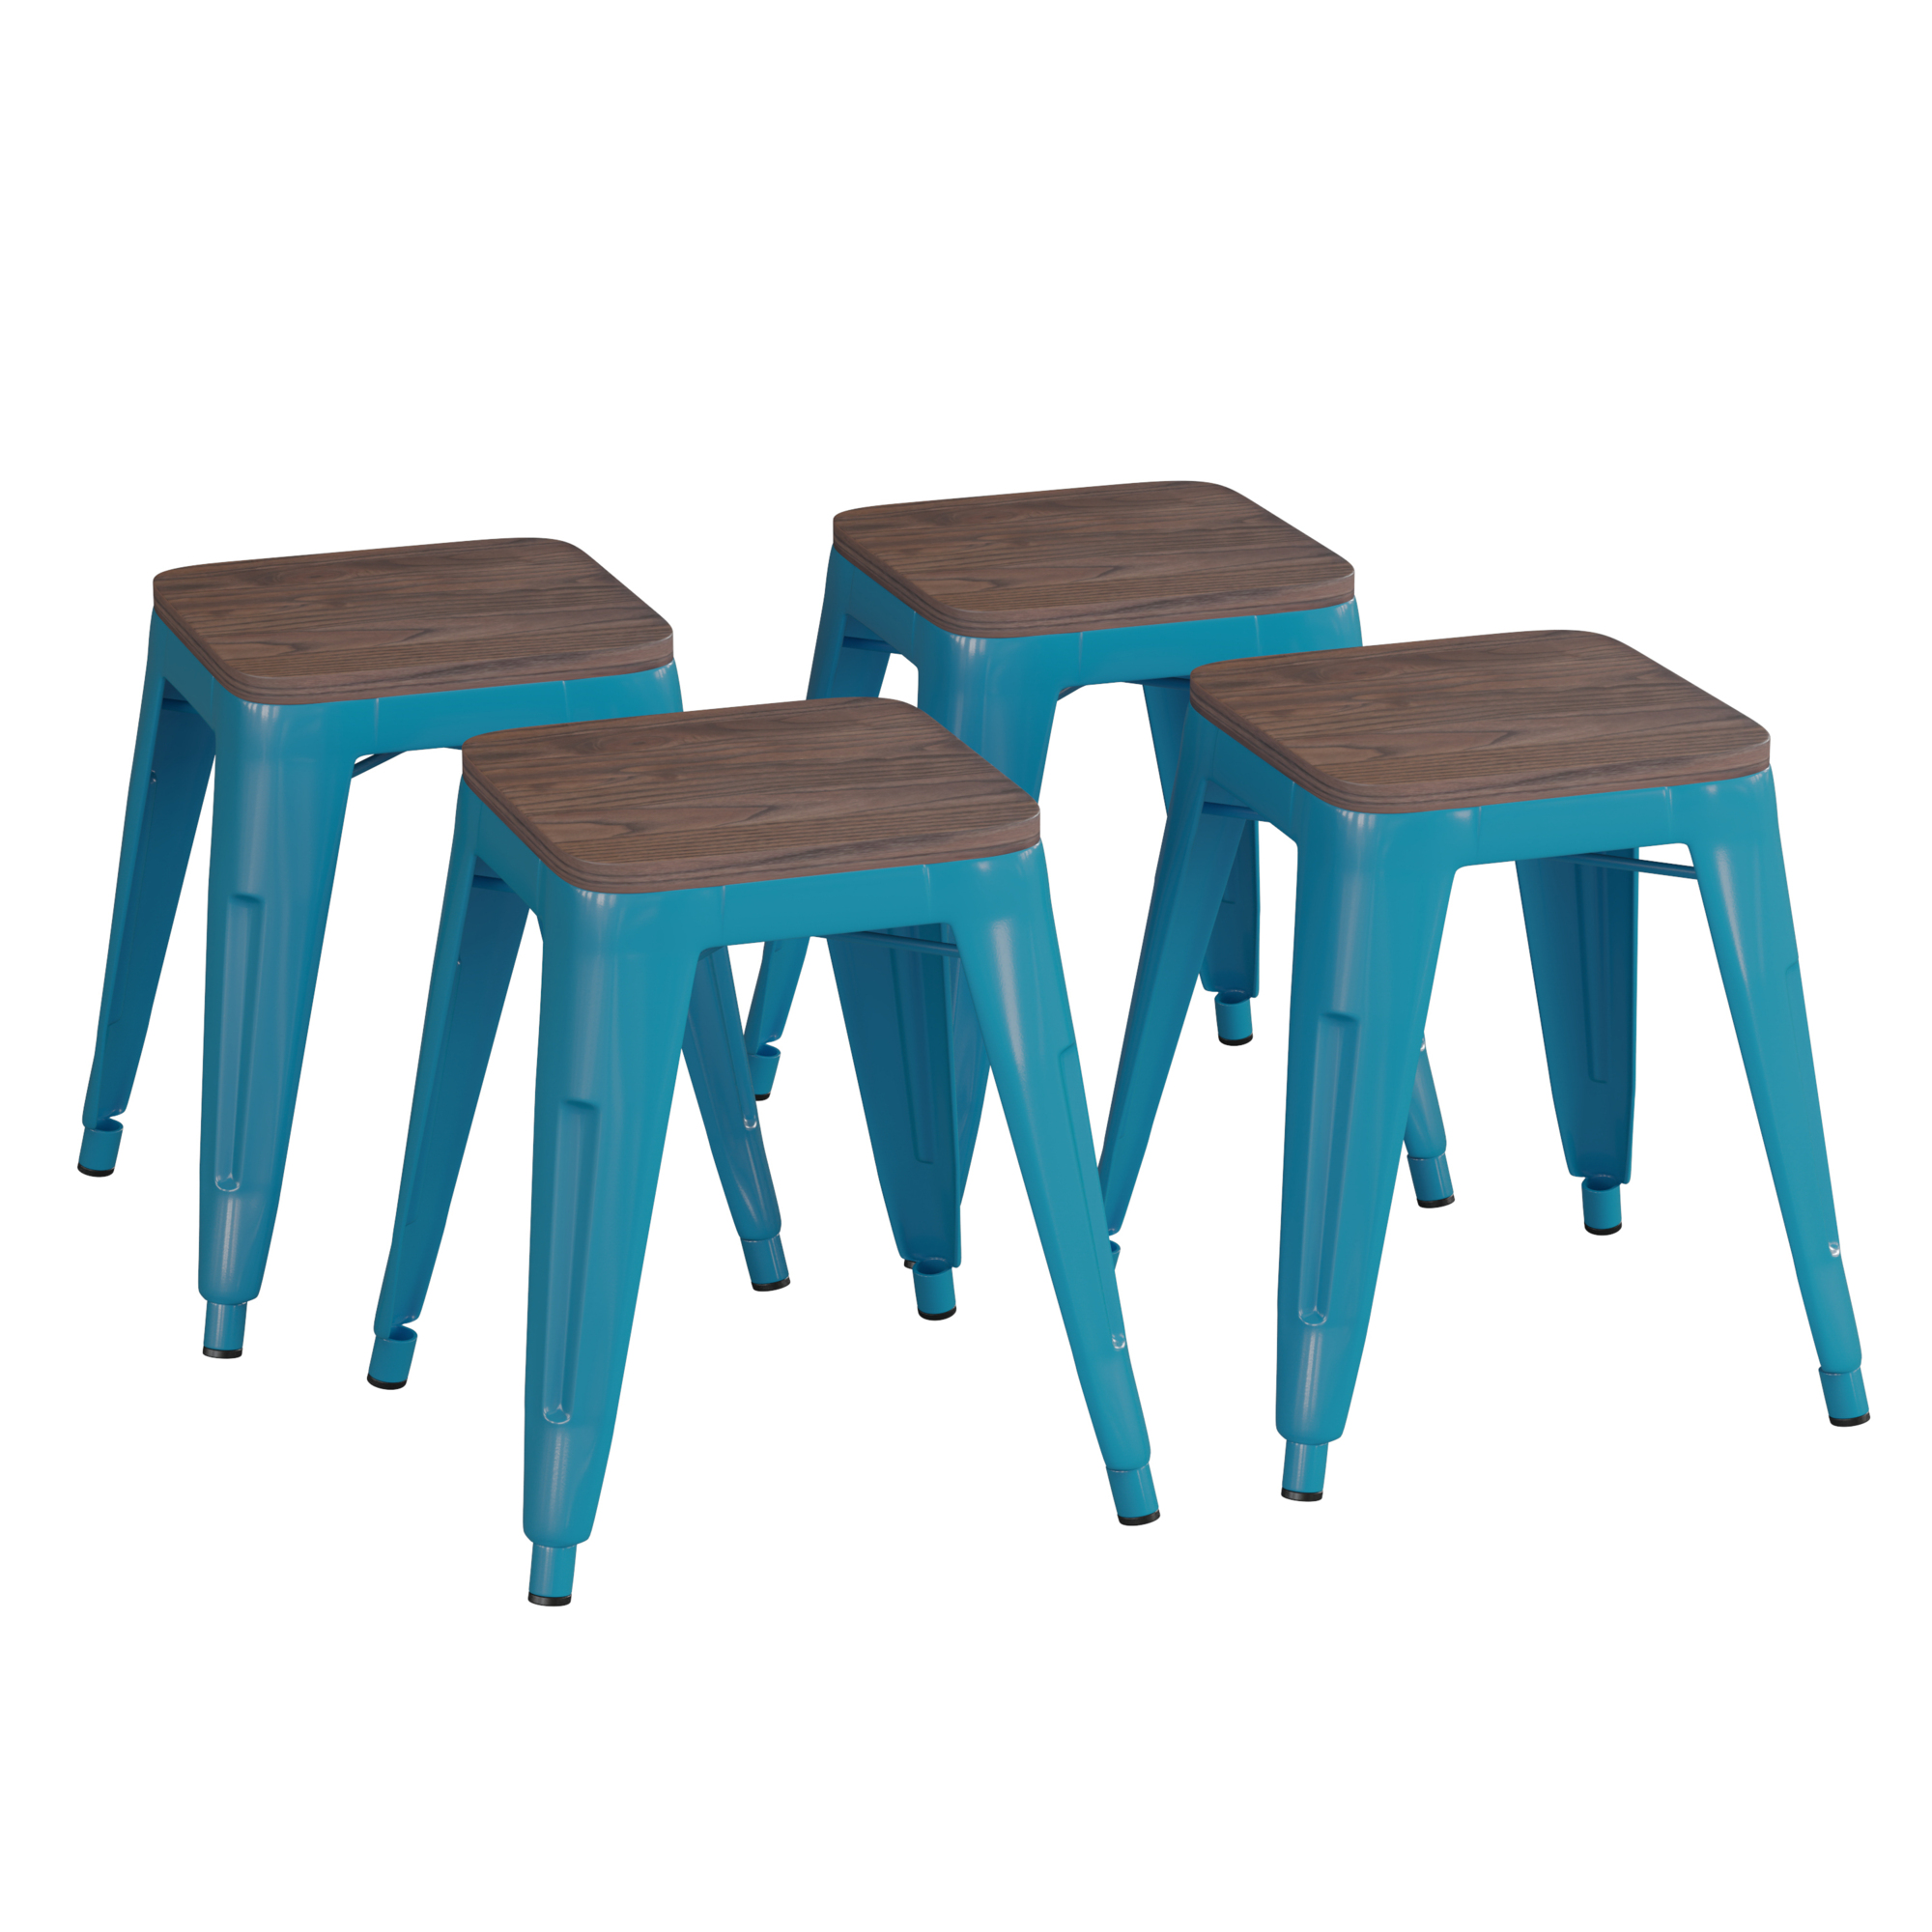 Flash Furniture, 4 Pack 18Inch Teal Metal Stool with Wood Seat, Primary Color Blue, Included (qty.) 4, Model ETBT350318TLWD